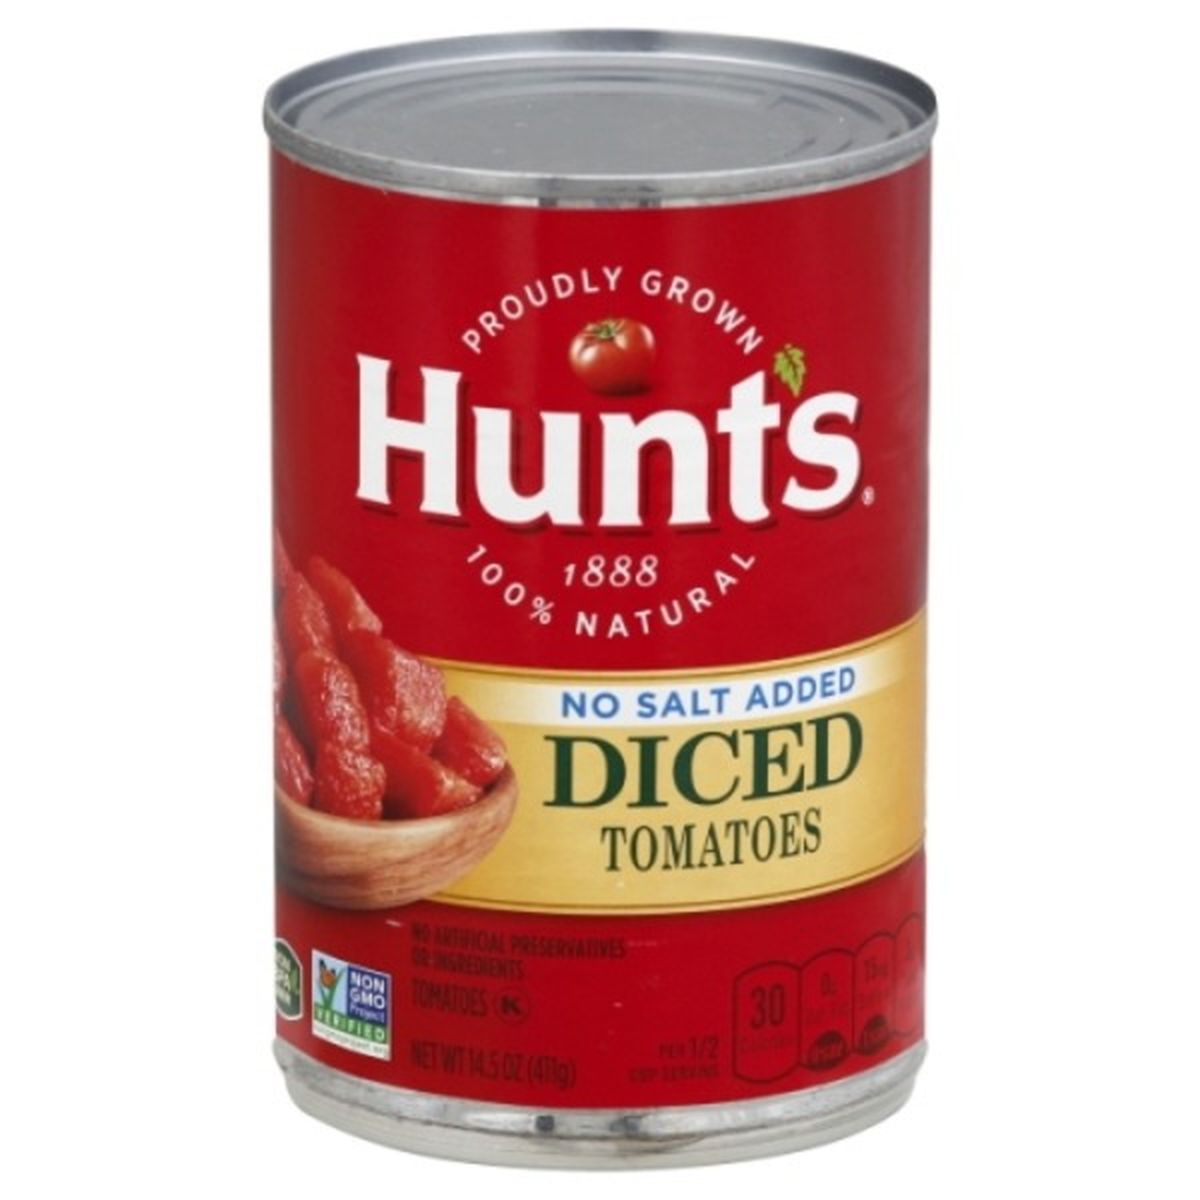 Calories in Hunt's Tomatoes, No Salt Added, Diced